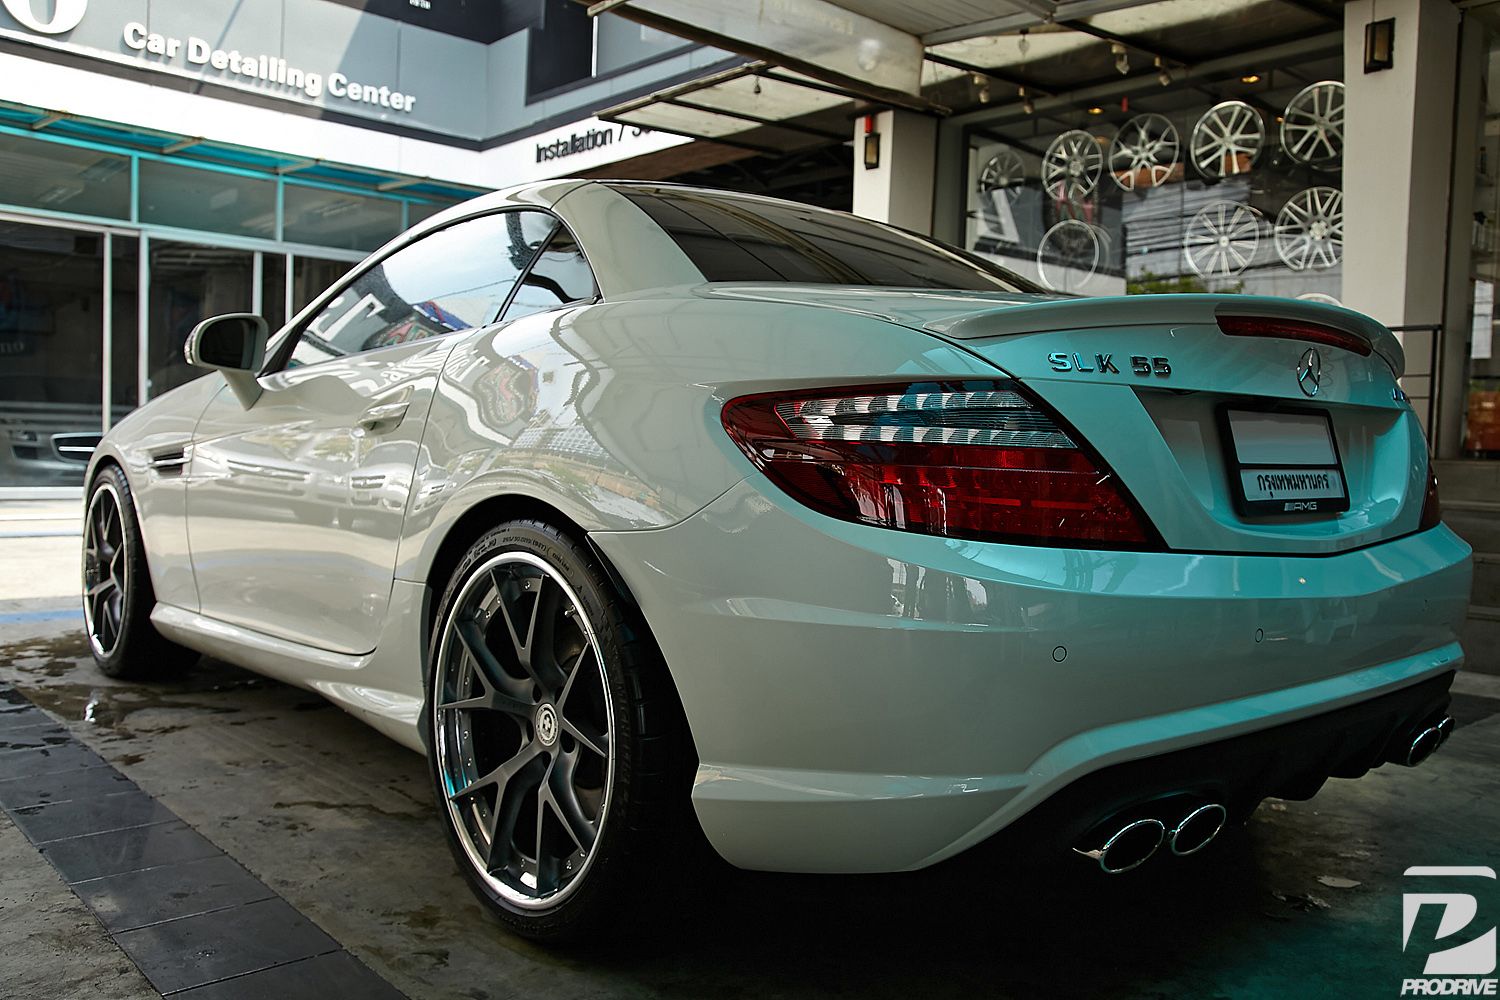 Mercedes-Benz SLK Class with 19-inch HRE S101